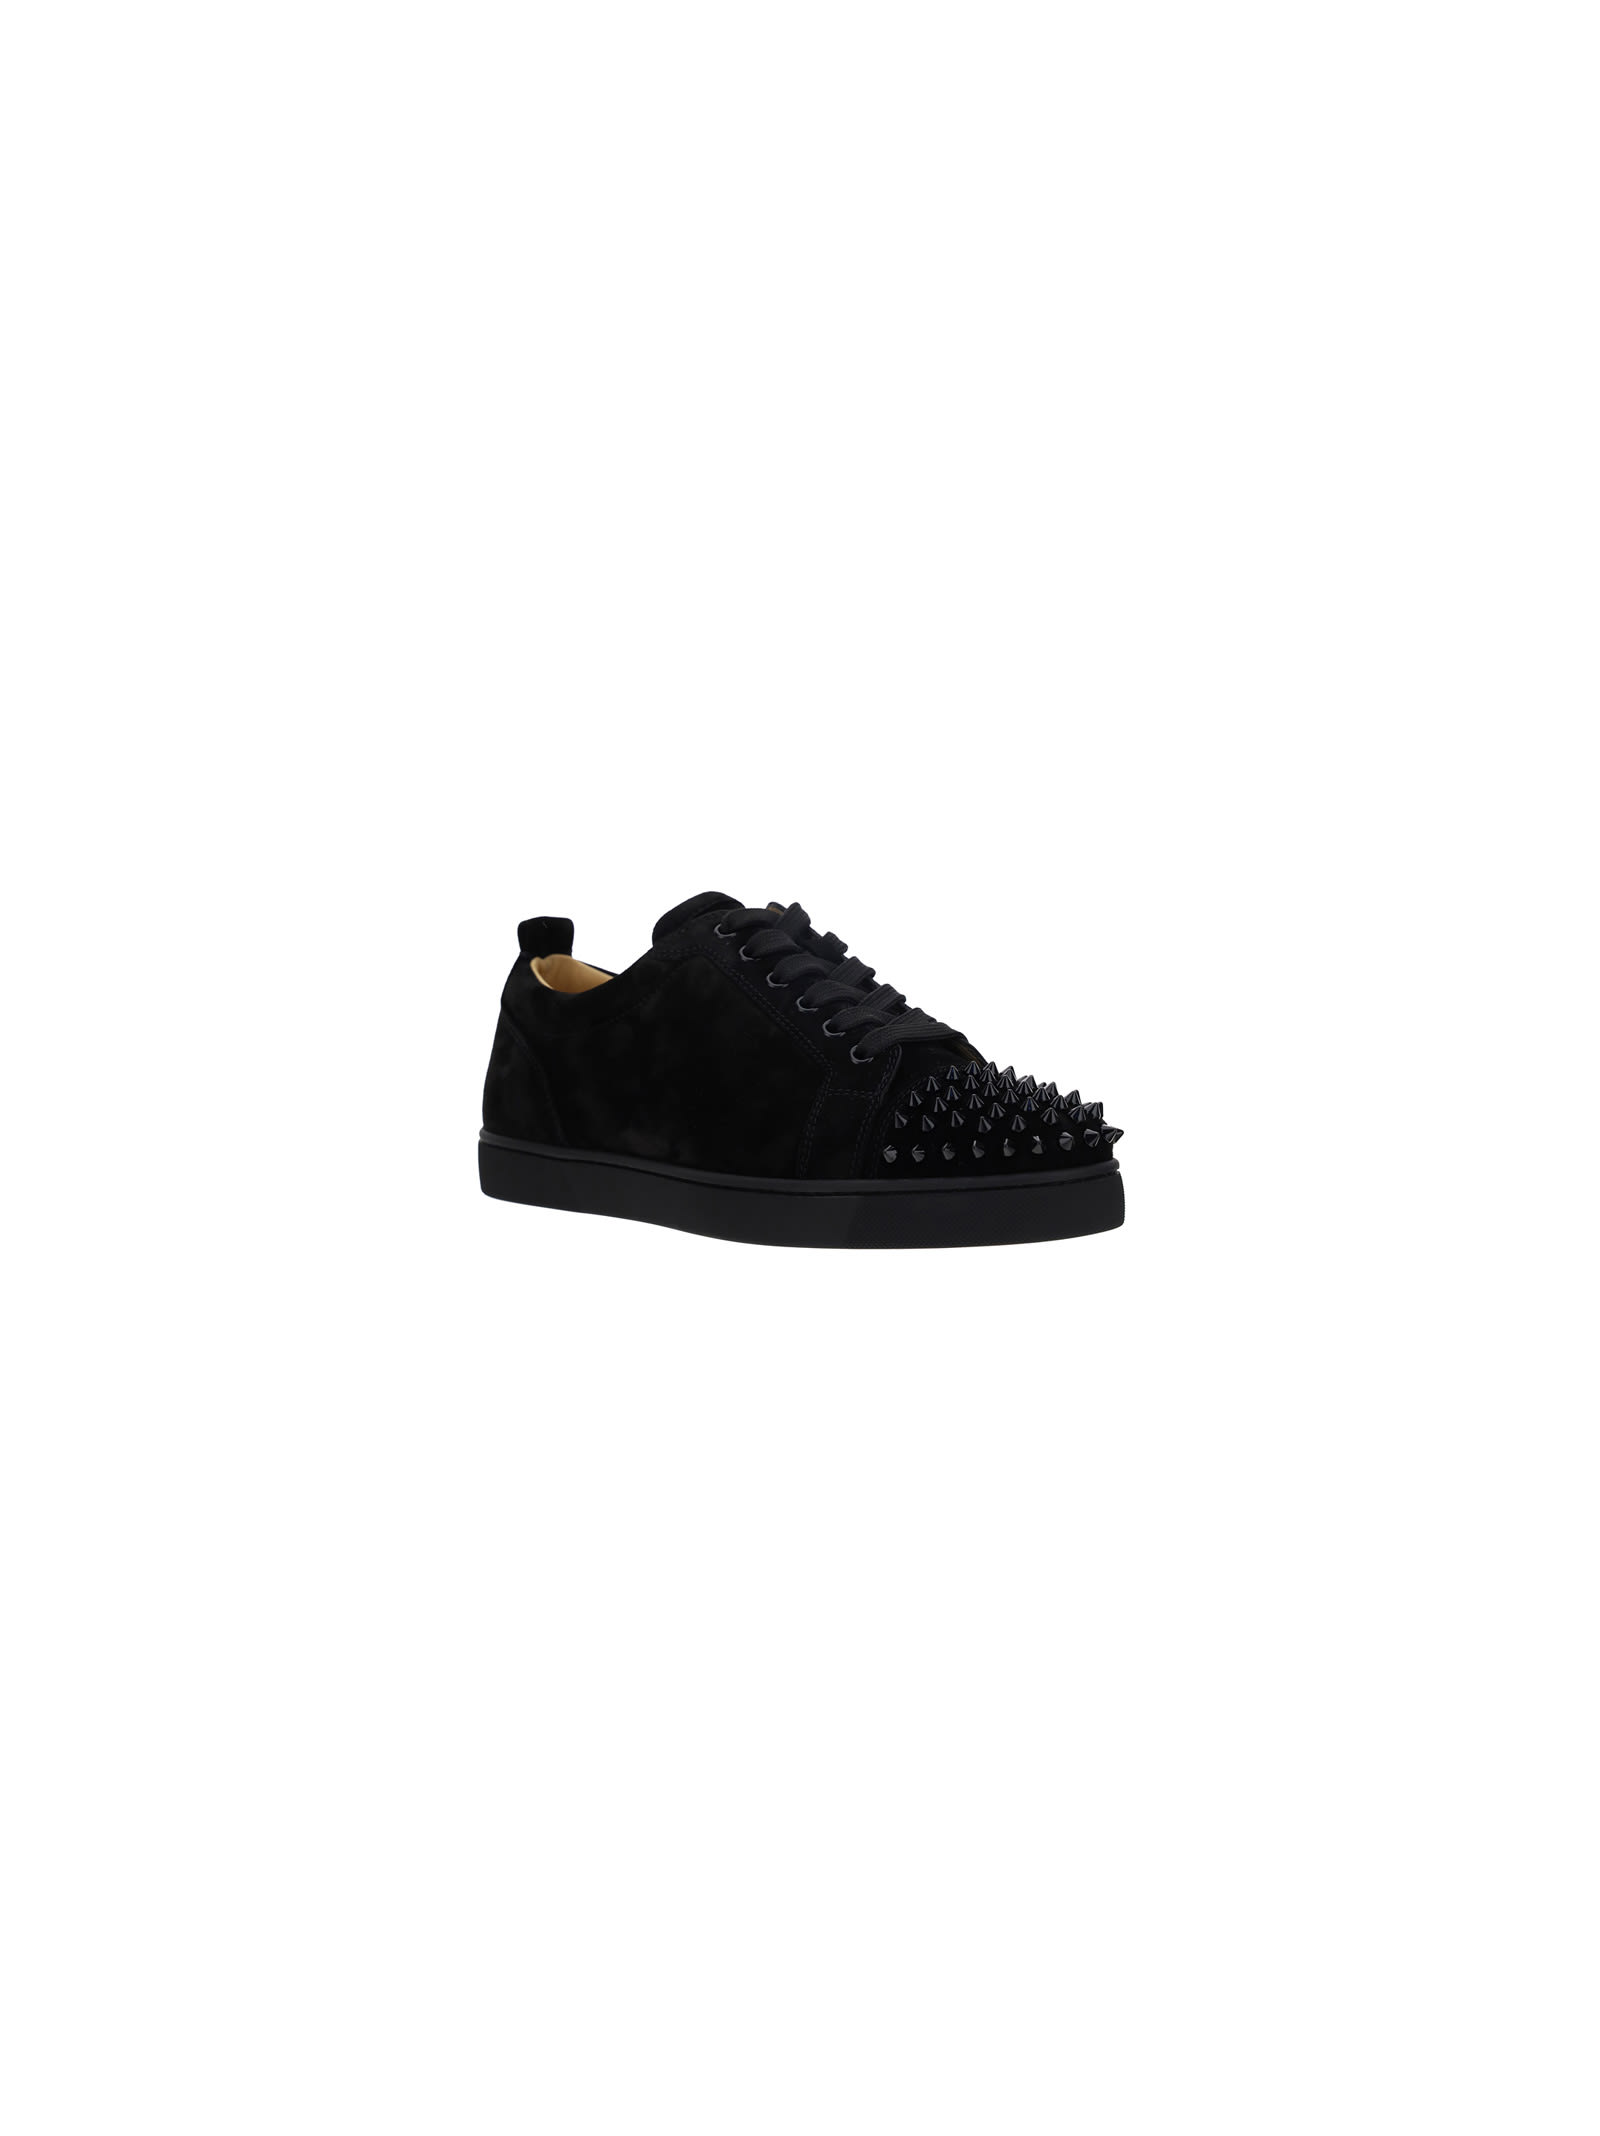 Louis Junior Spikes - Sneakers - Veau velours and spikes - Saharienne - Christian  Louboutin United States